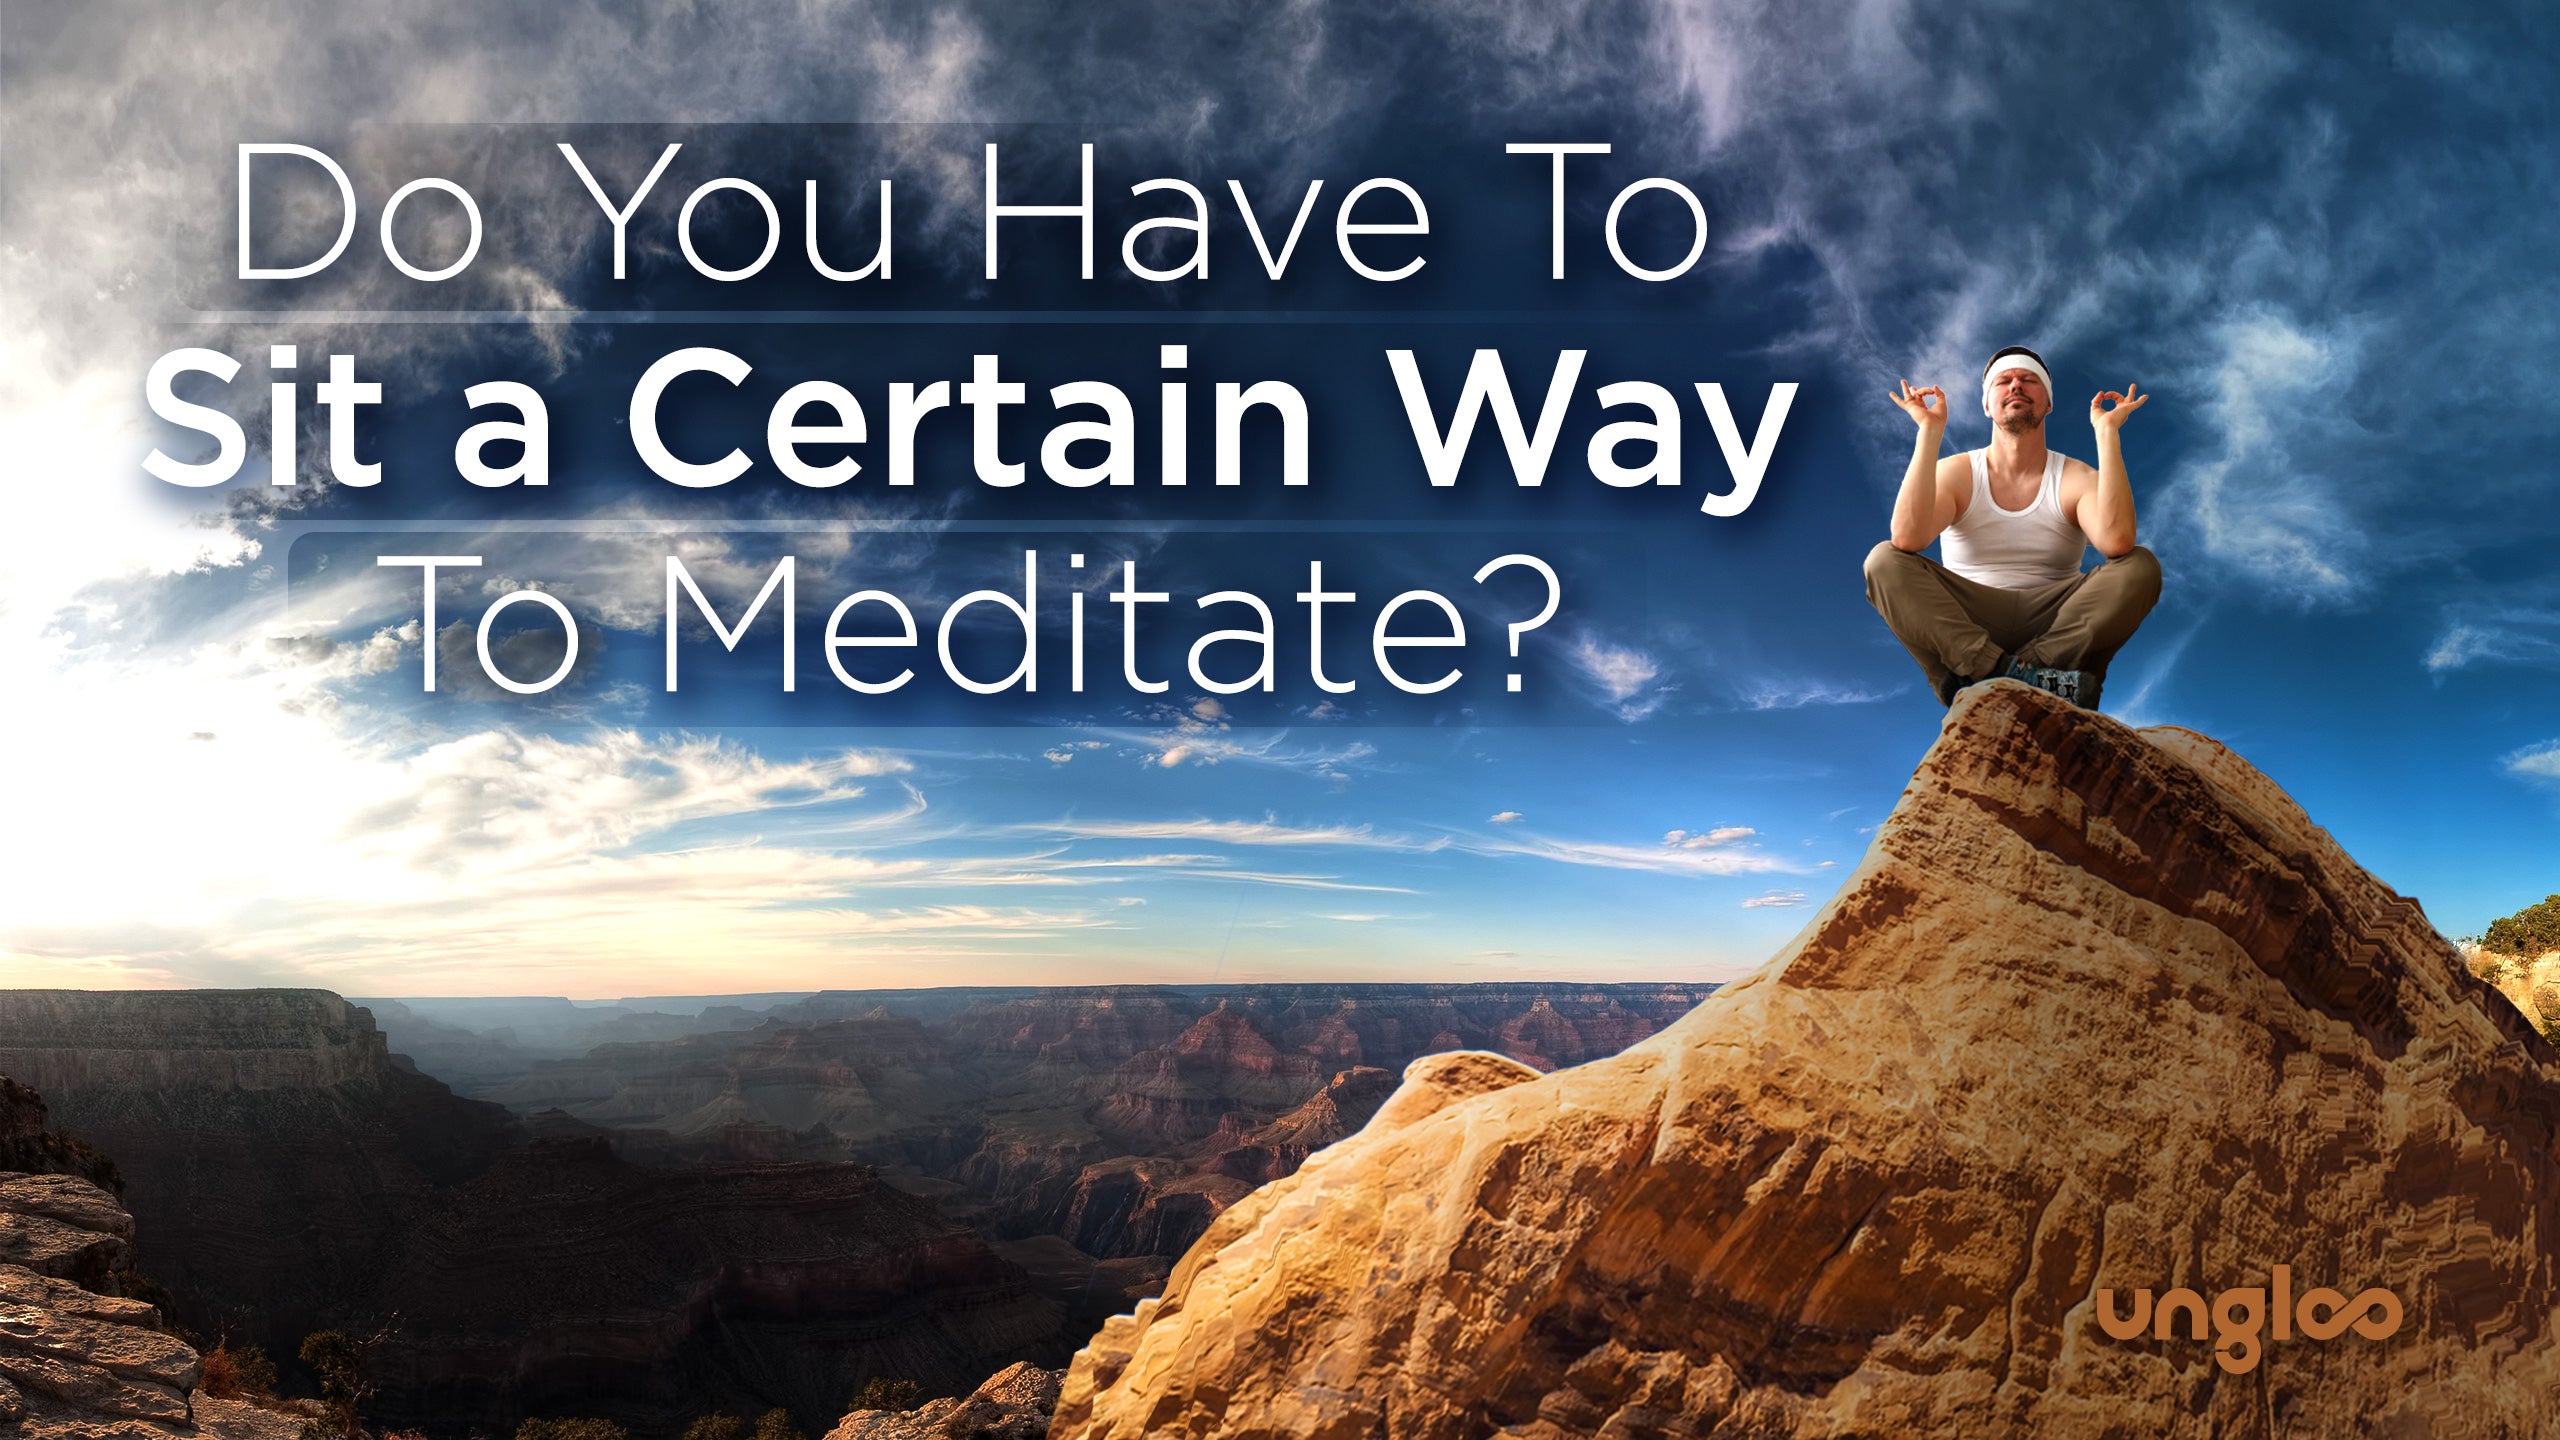 Do You Have To Sit a Certain Way To Meditate?